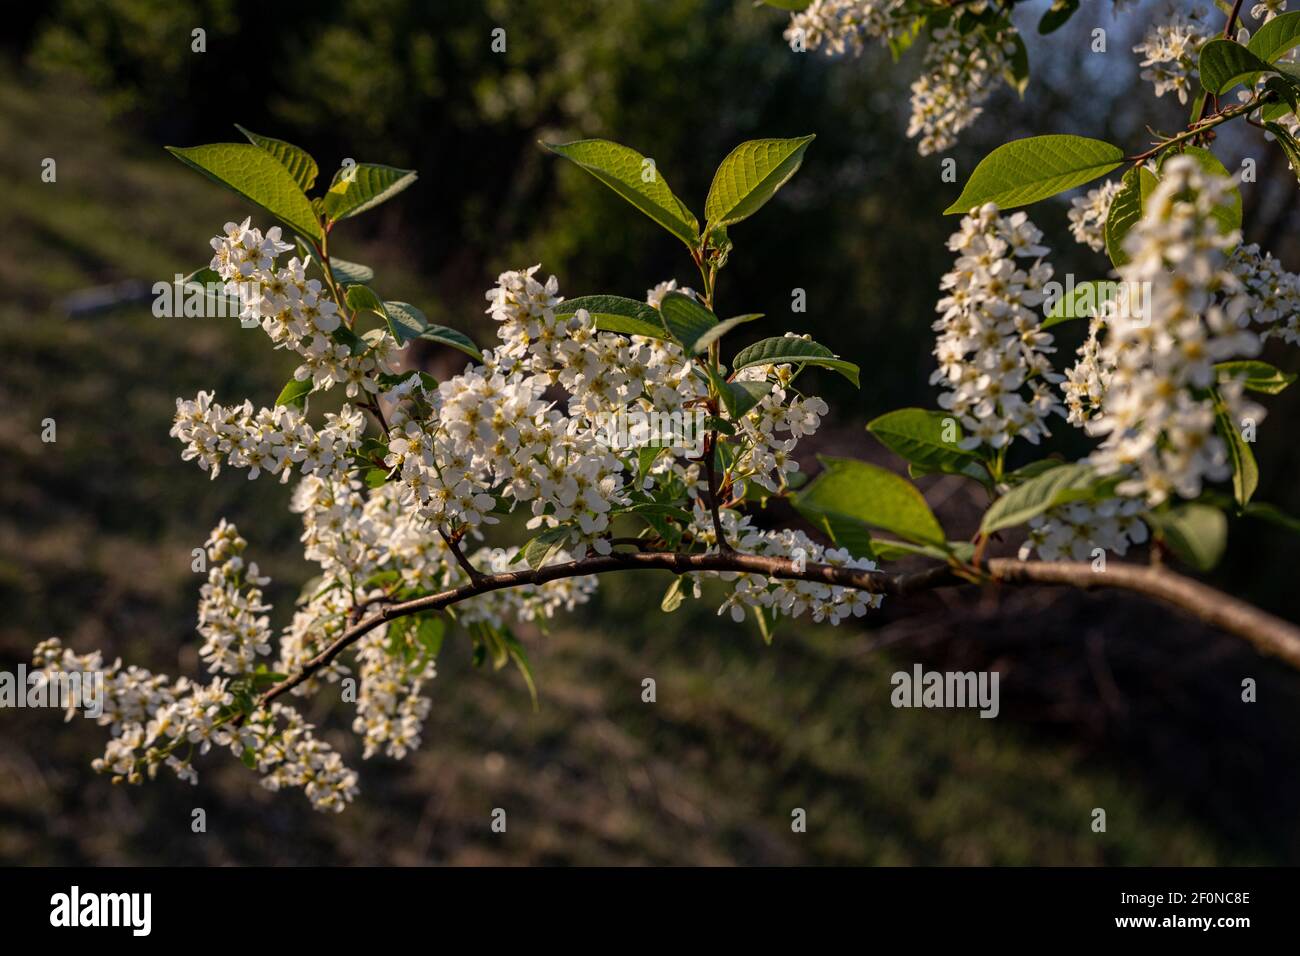 Delicate white clusters of flowers blooming bird-cherry tree in spring ...